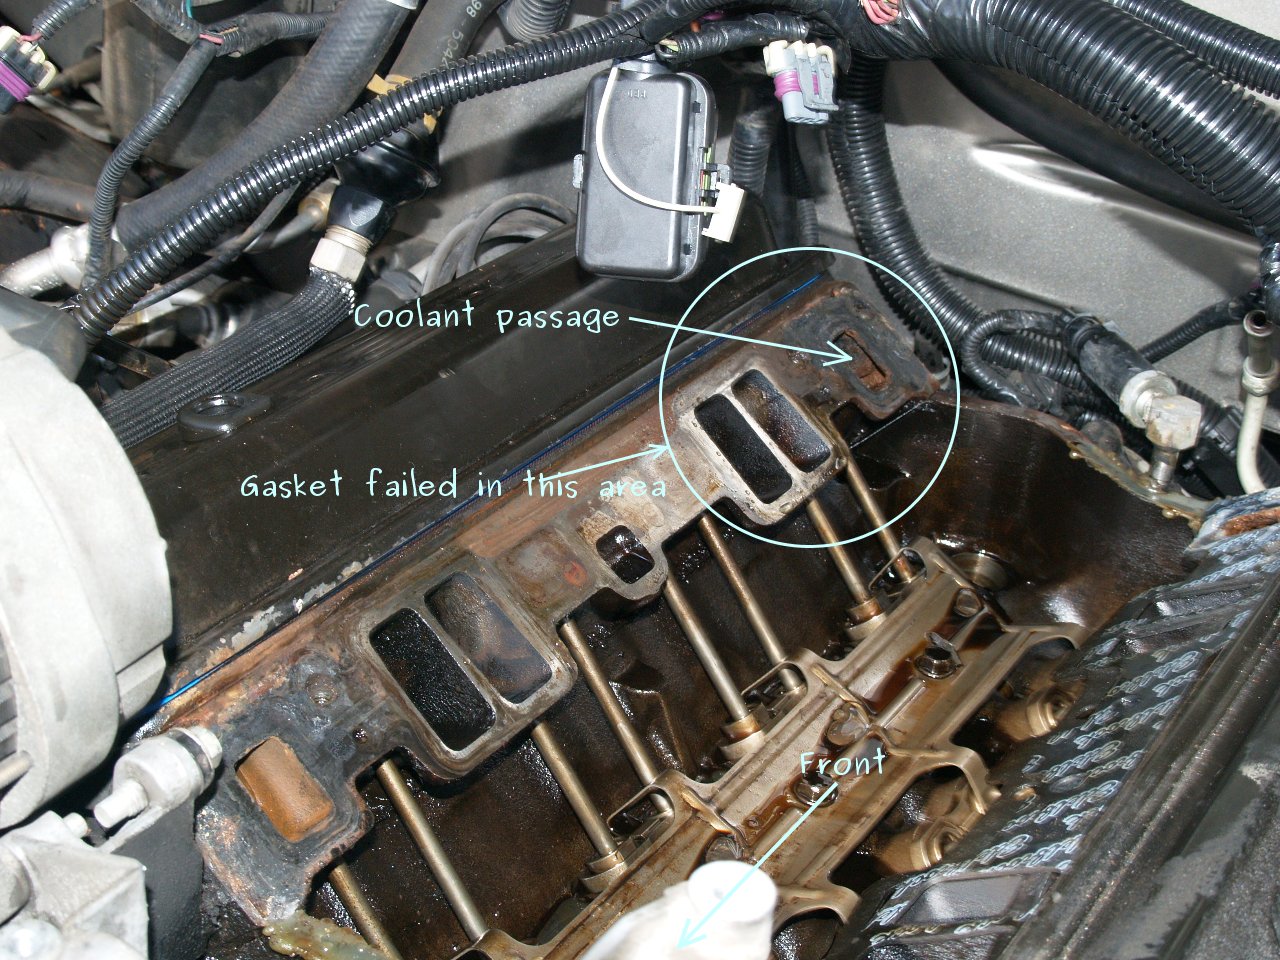 See P20E3 in engine